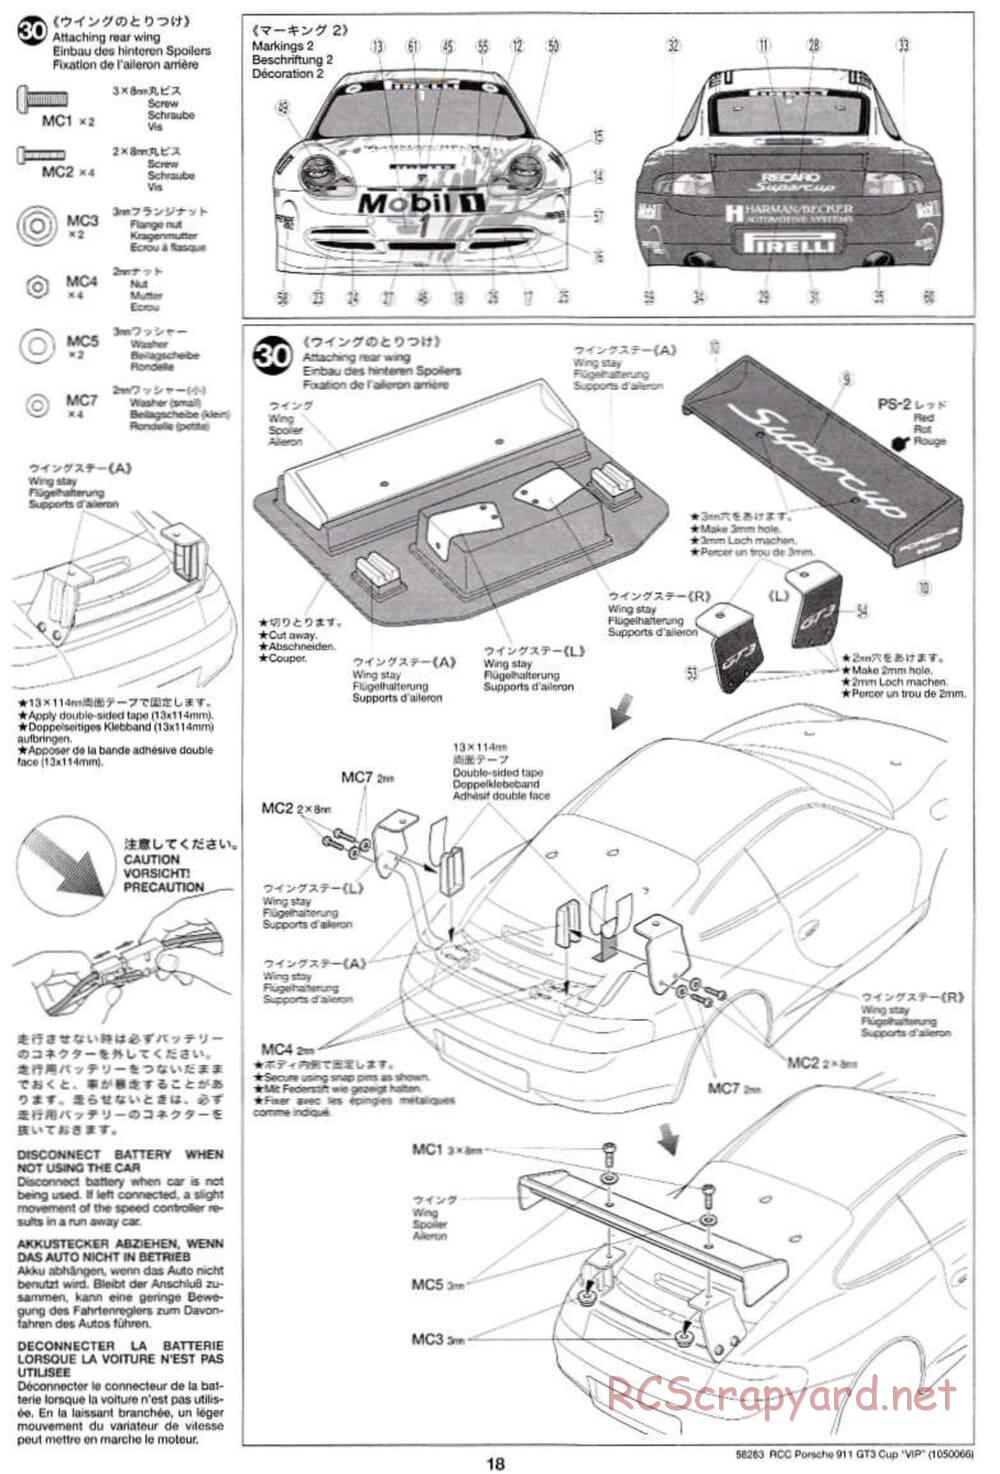 Tamiya - Porsche 911 GT3 Cup VIP - TL-01 Chassis - Manual - Page 18